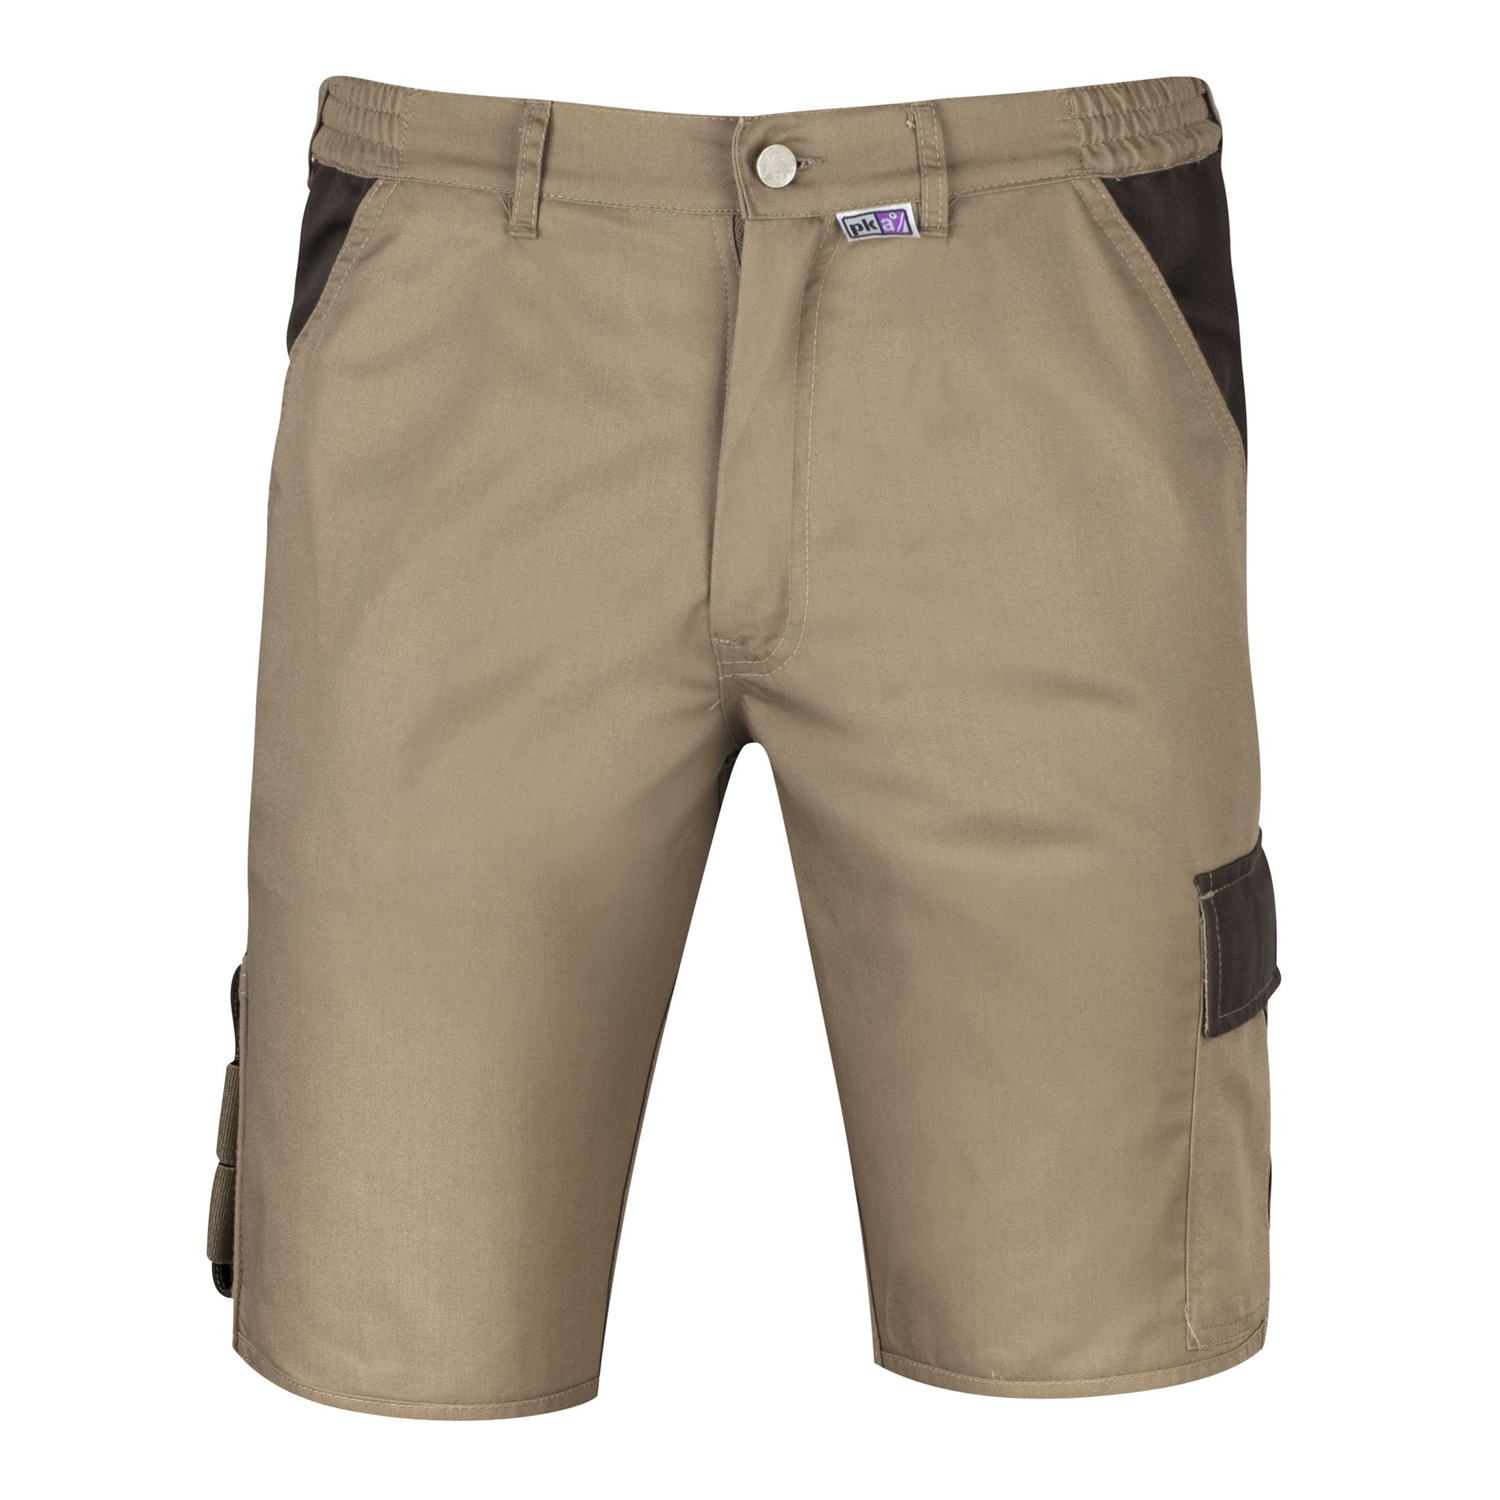 Workingshorts in brown by PKA Klöcker, large sizes up to 66